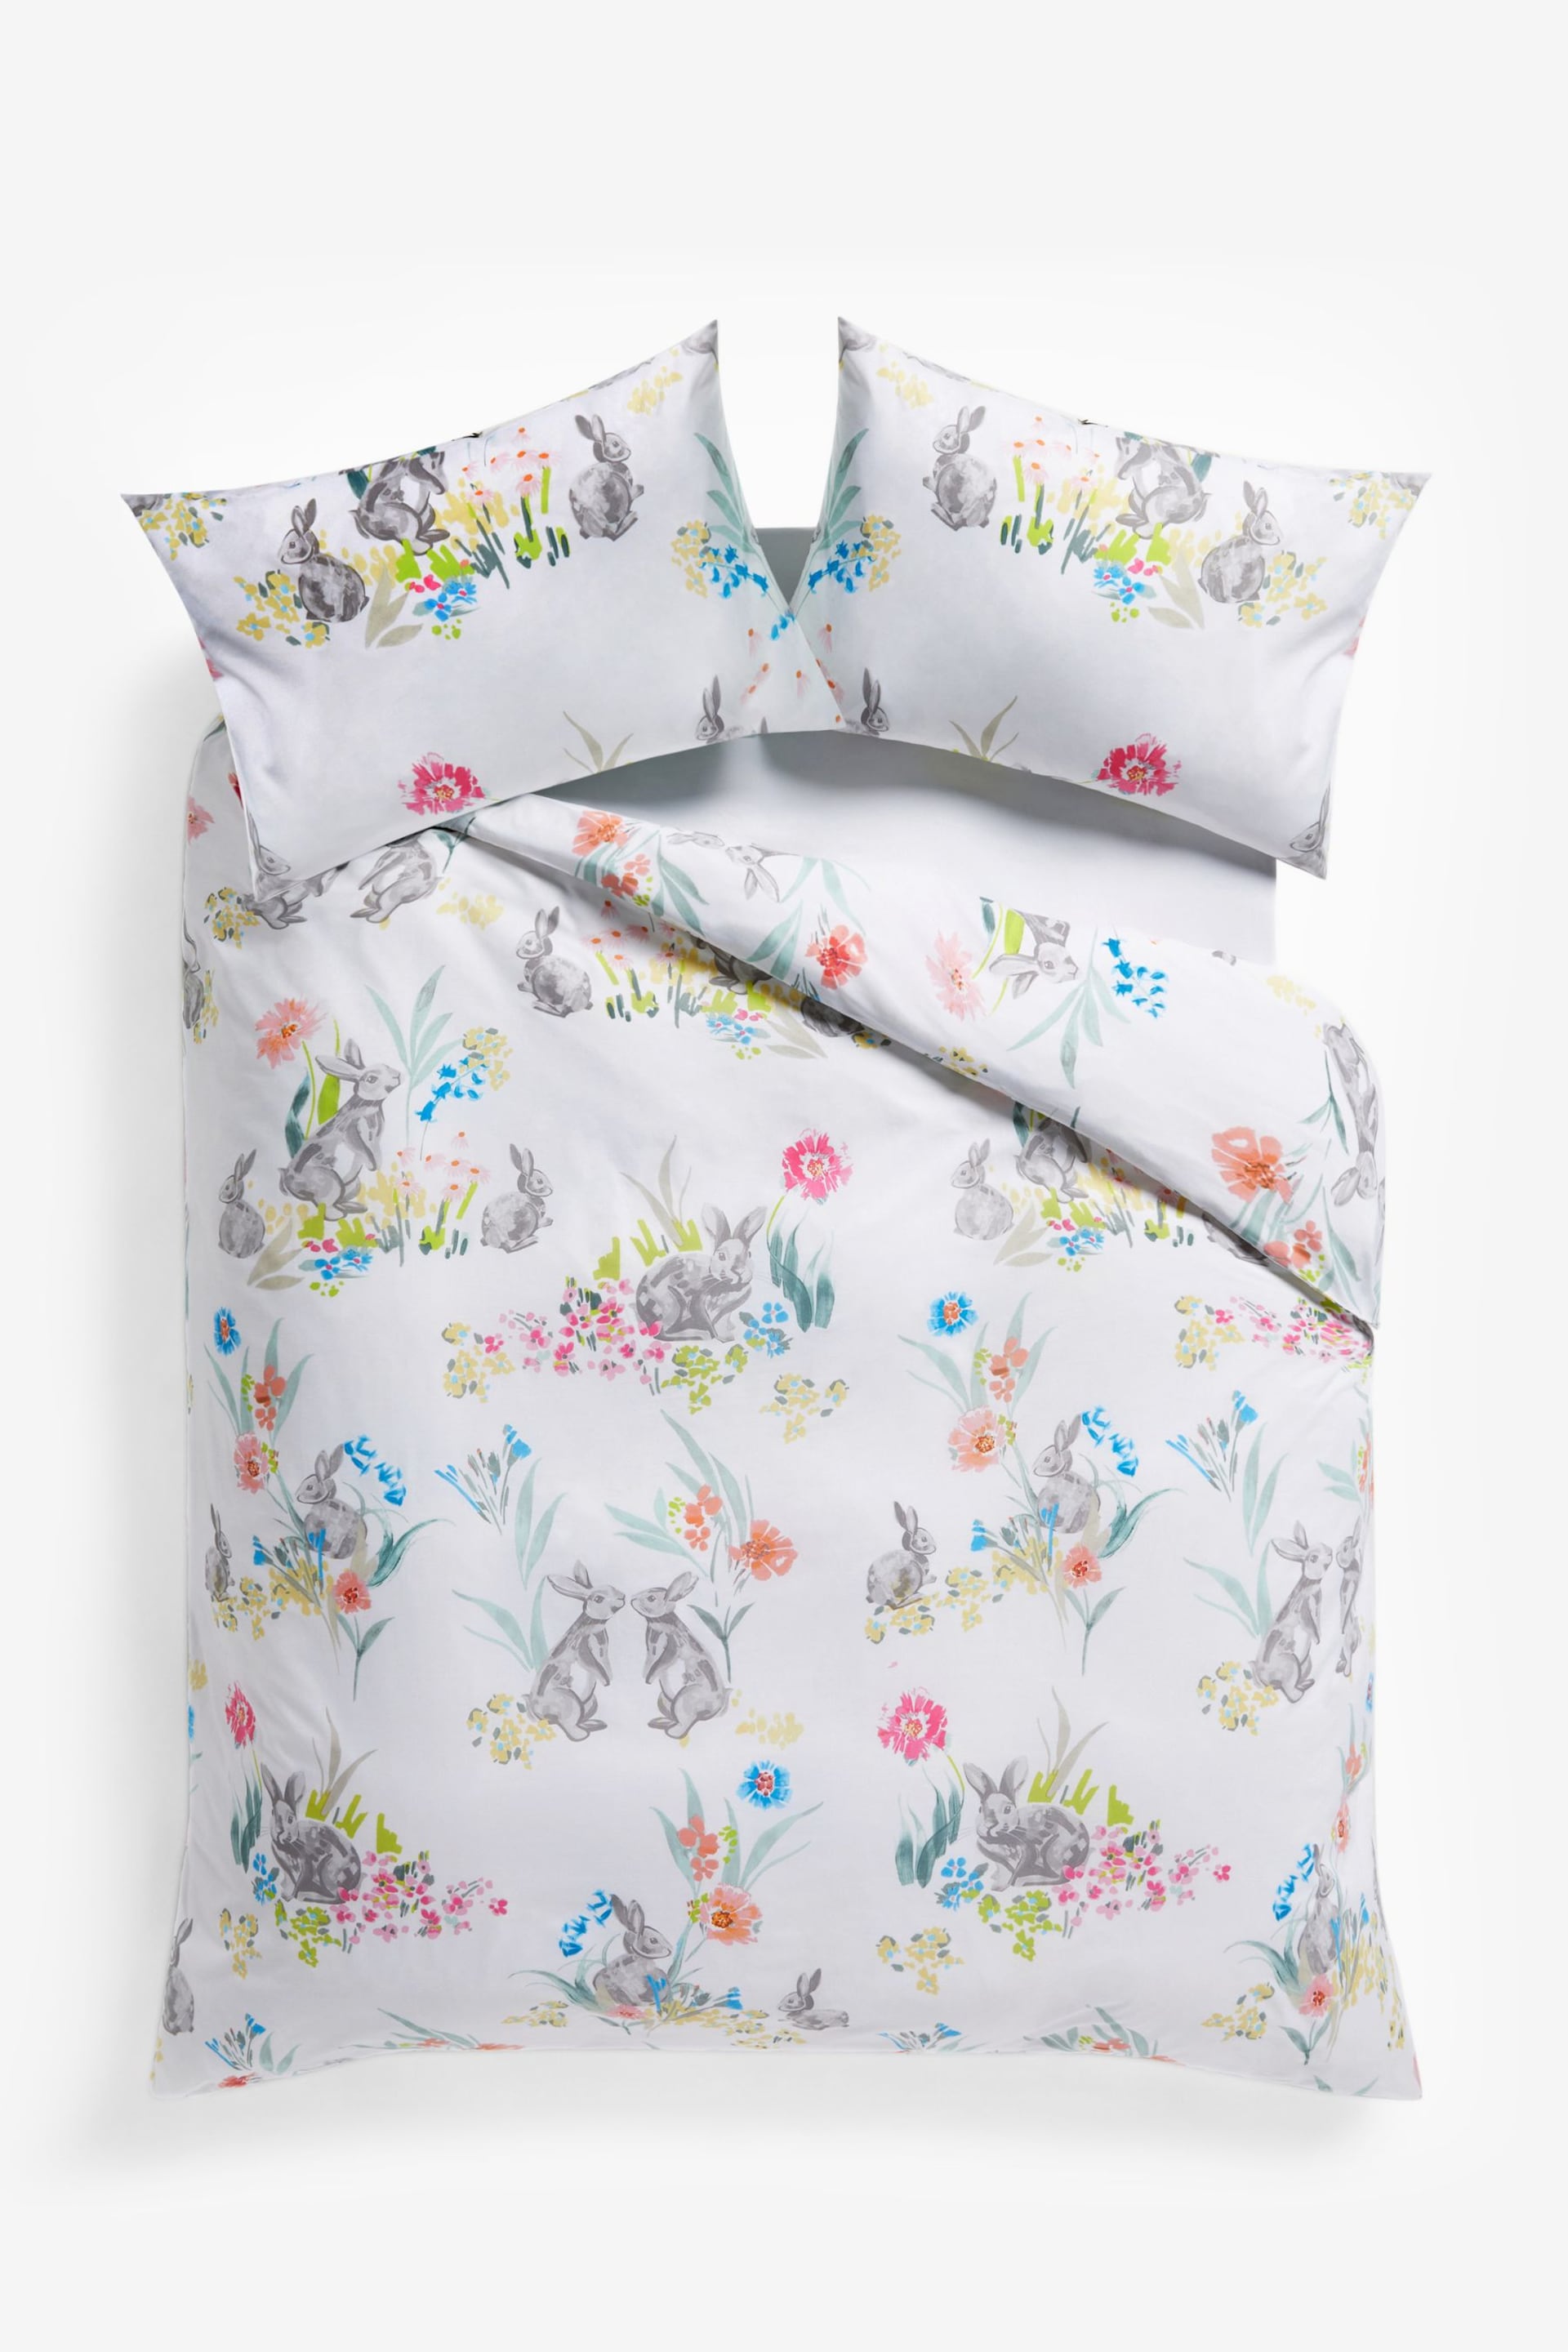 White Cotton Rich Bunny Reversible Duvet Cover and Pillowcase Set - Image 3 of 4